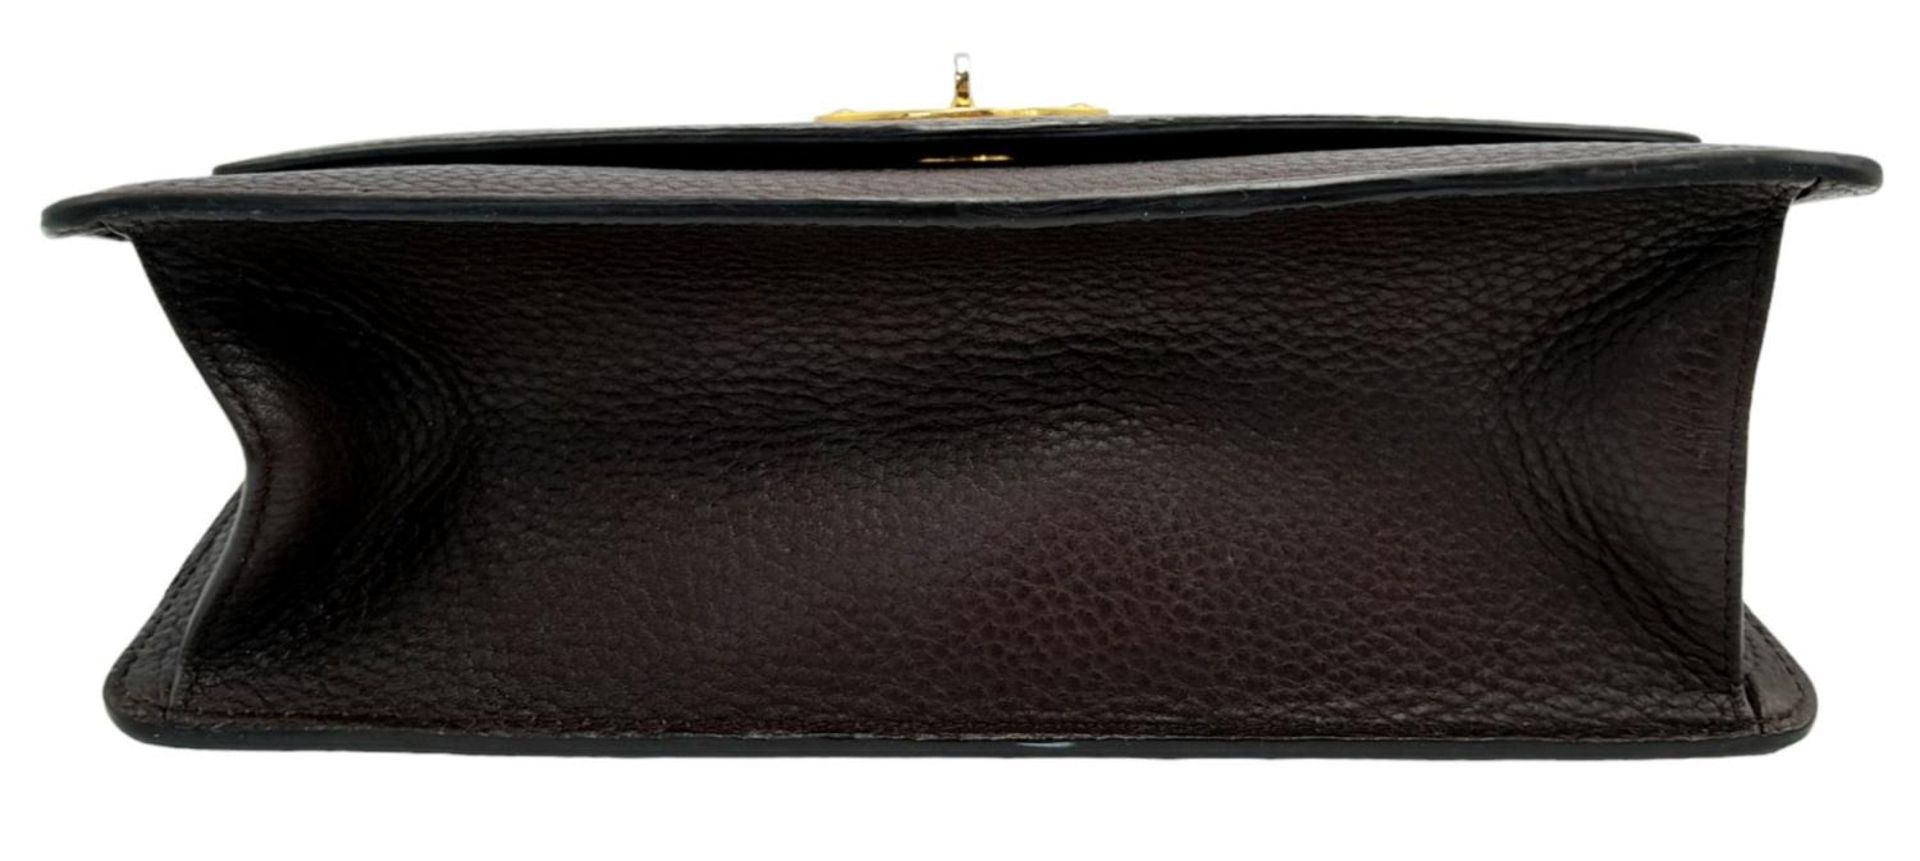 A Mulberry Oxblood Darley Bag. Leather exterior with gold-toned hardware and twist lock closure. - Bild 4 aus 10